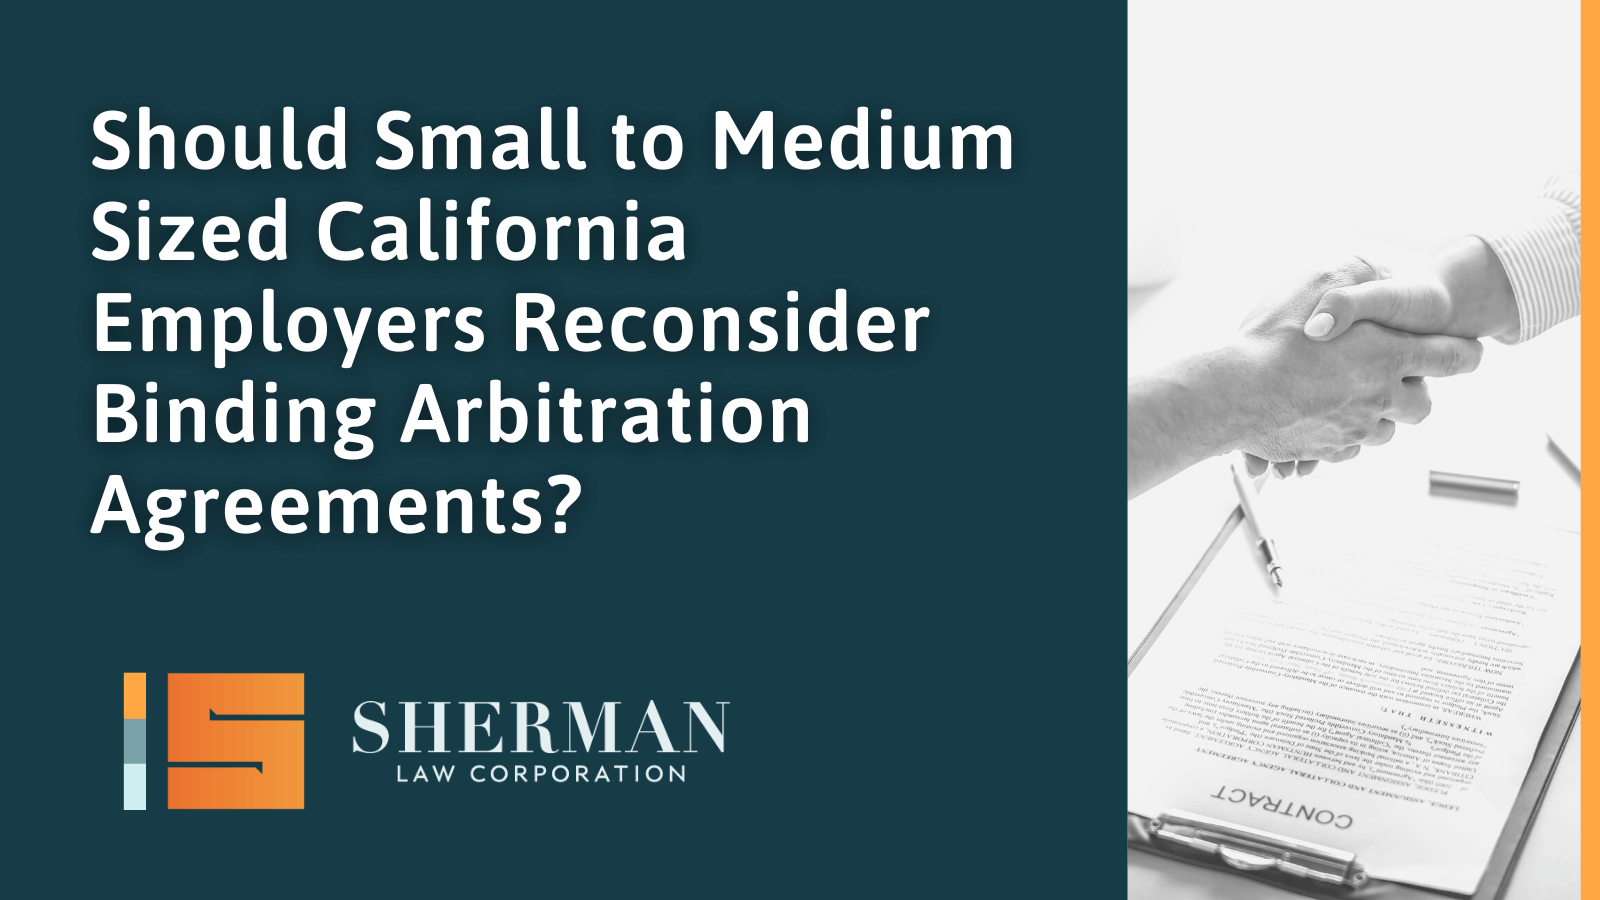 Should Small to Medium Sized California Employers Reconsider Binding Arbitration Agreements - callifornia employment law - sherman law corporation